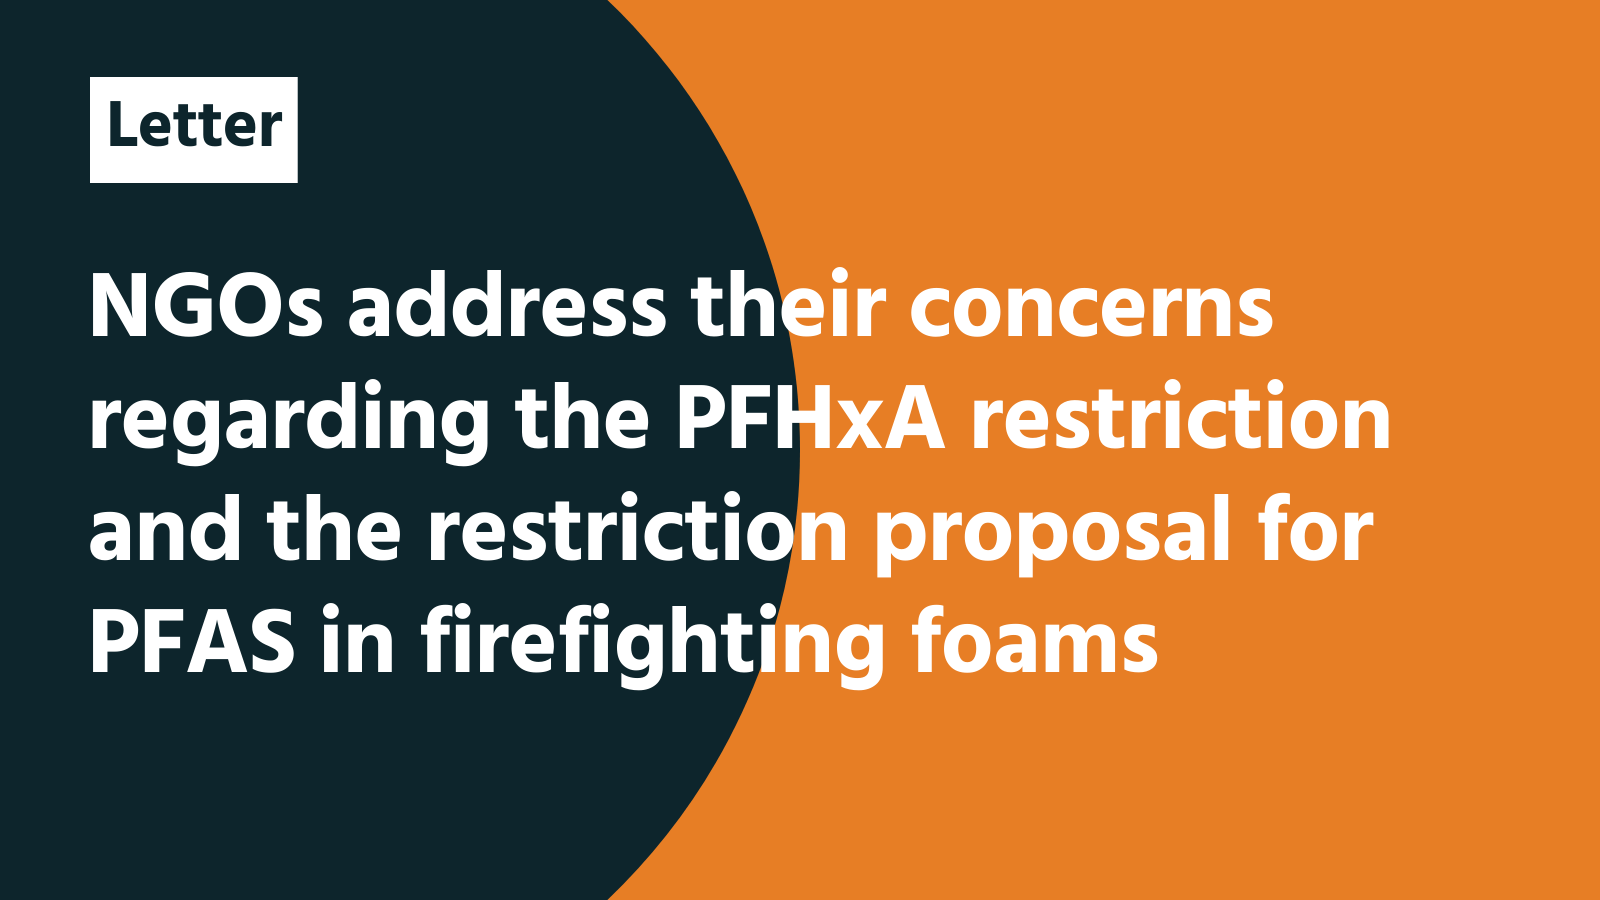 Letter: NGOs address their concerns regarding the PFHxA restriction and the restriction proposal for PFAS in firefighting foams